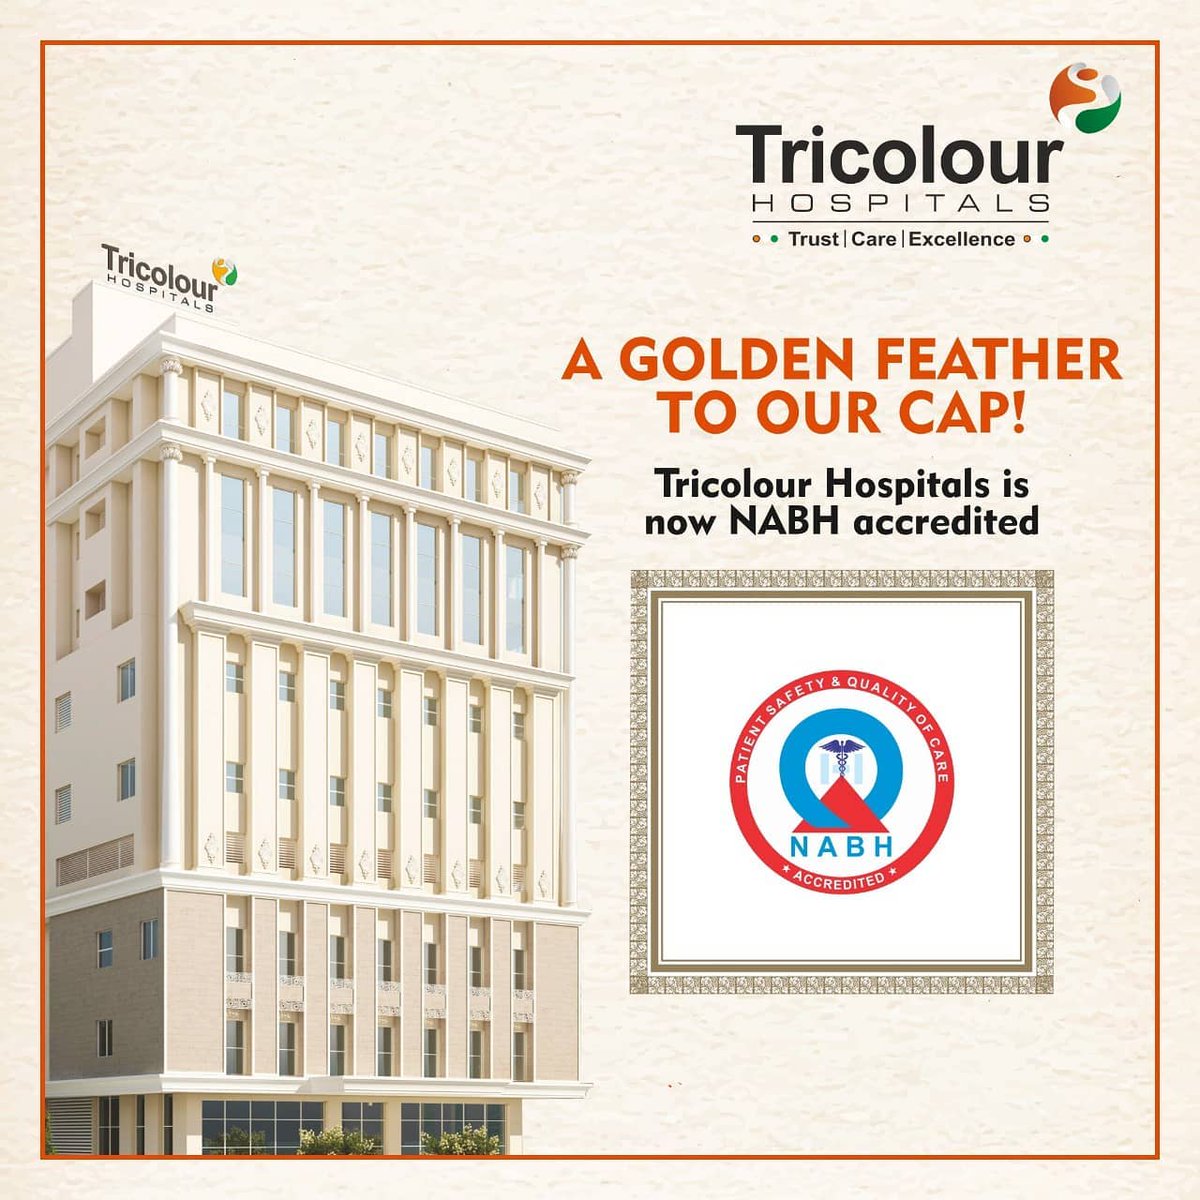 A moment of pride and honour. We are pleased to share with you that The Tricolour Hospitals is granted with the accreditation by NABH.
.
.
#TricolourHospitals #vadodara #gujarat #HospitalinVadodara #HospitalinBaroda #NABHAccreditation #ProudMoment #FilledWithJoy #hospital #doctor